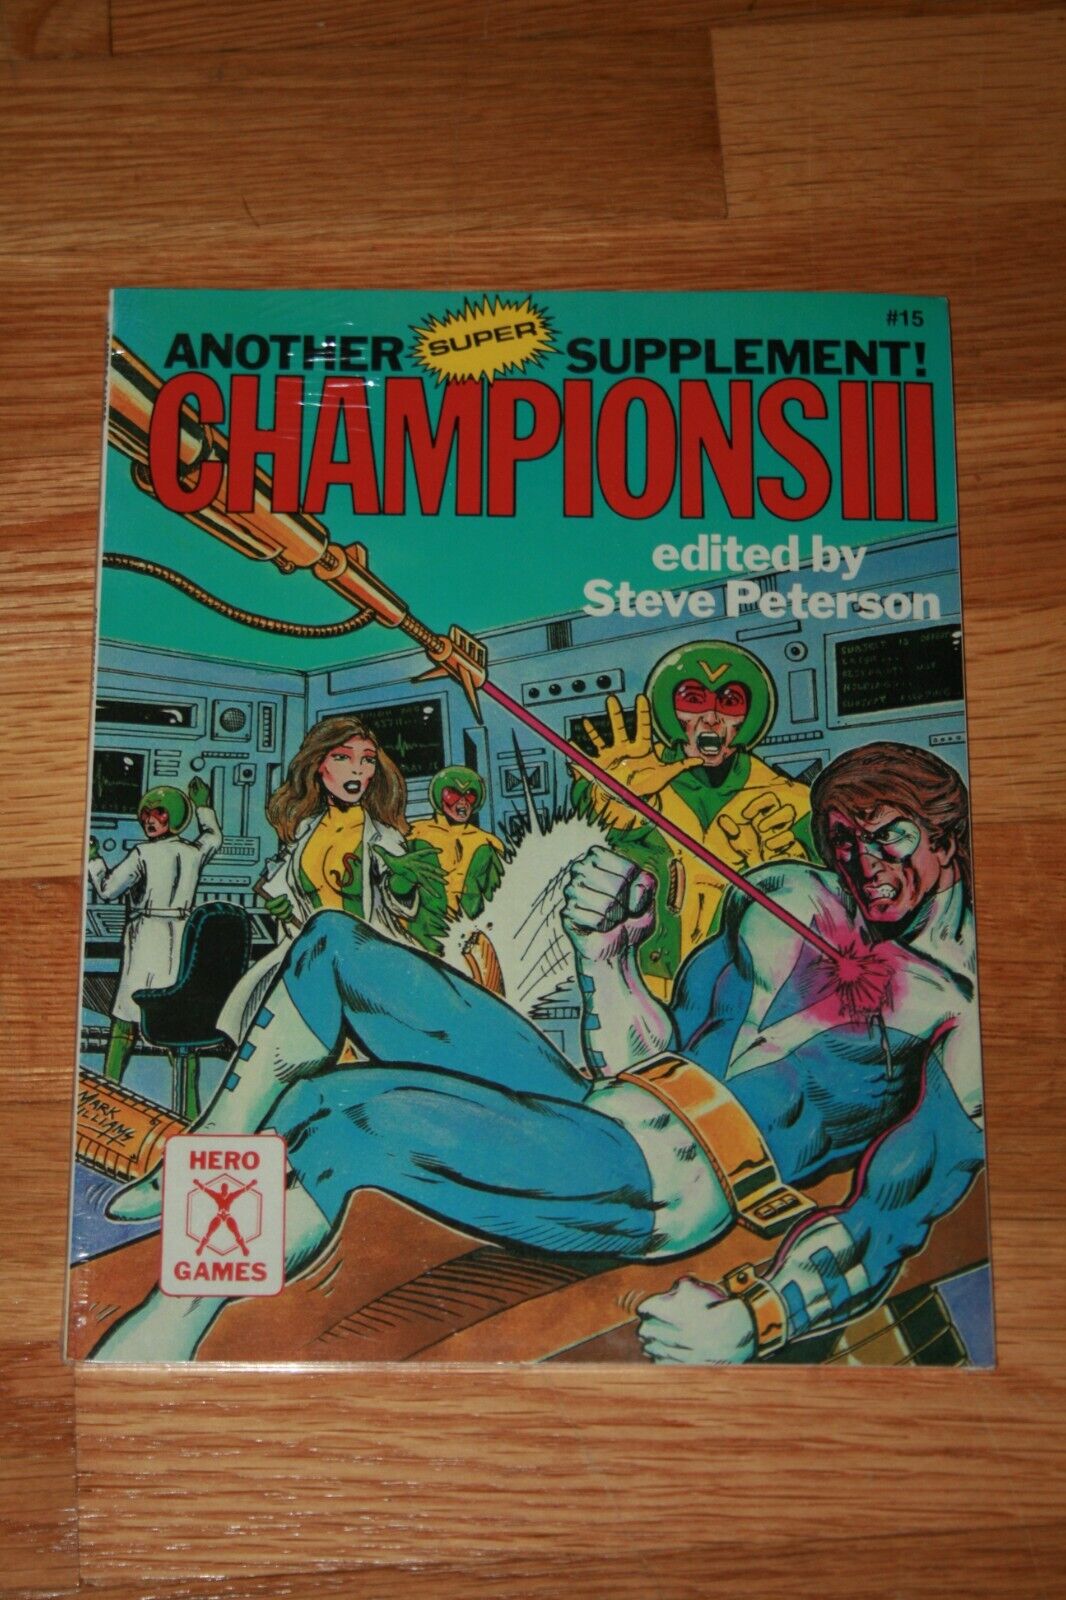 New Sealed Manga Another Super Supplement Champions III Hero Game Peterson #15